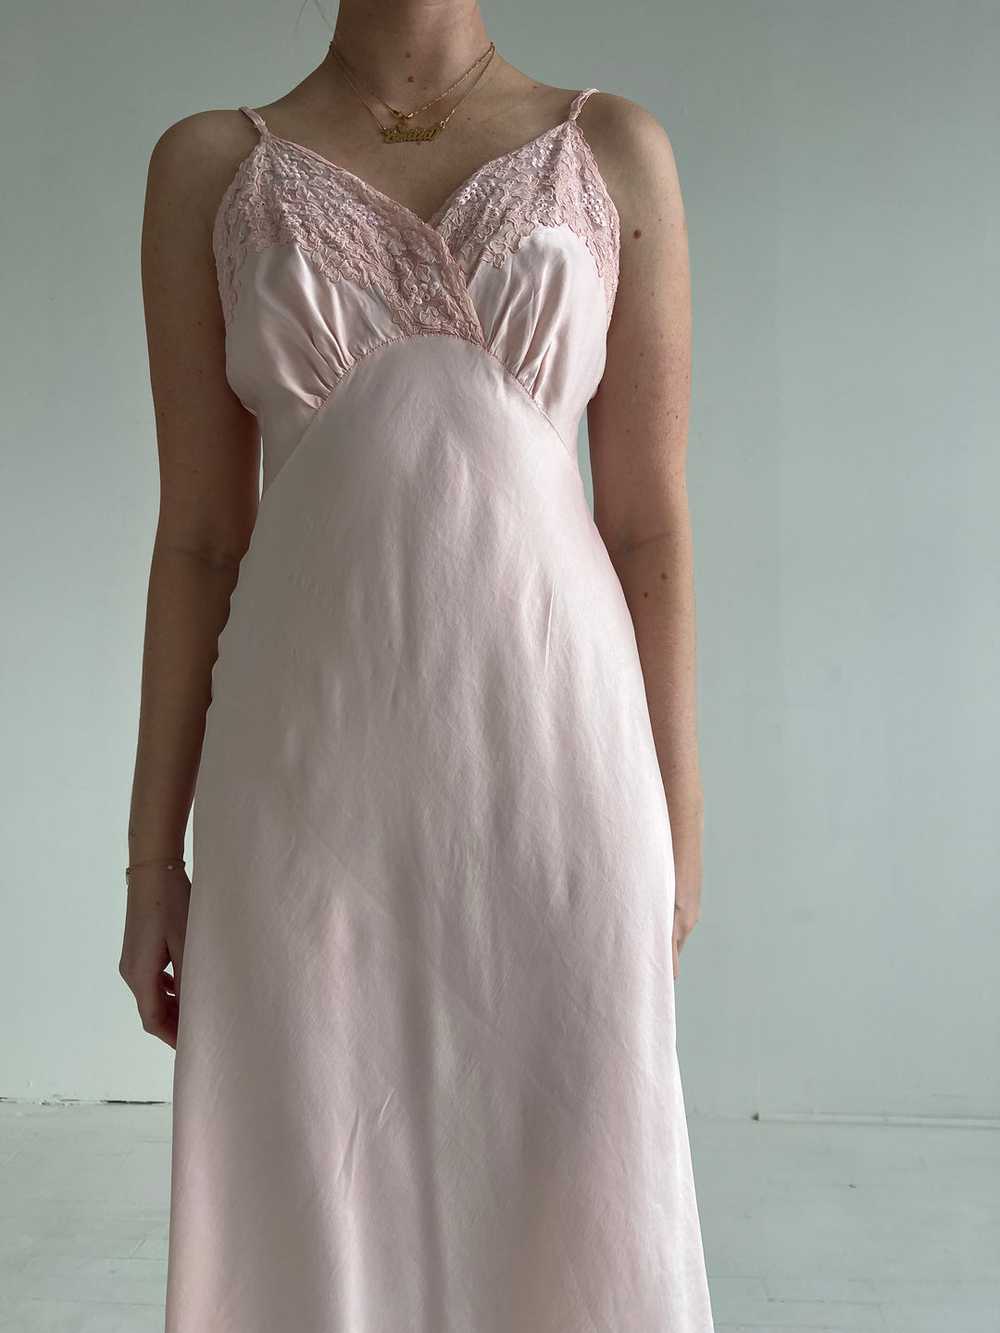 1930's Pink Silk Slip Dress with Embroidery - image 4